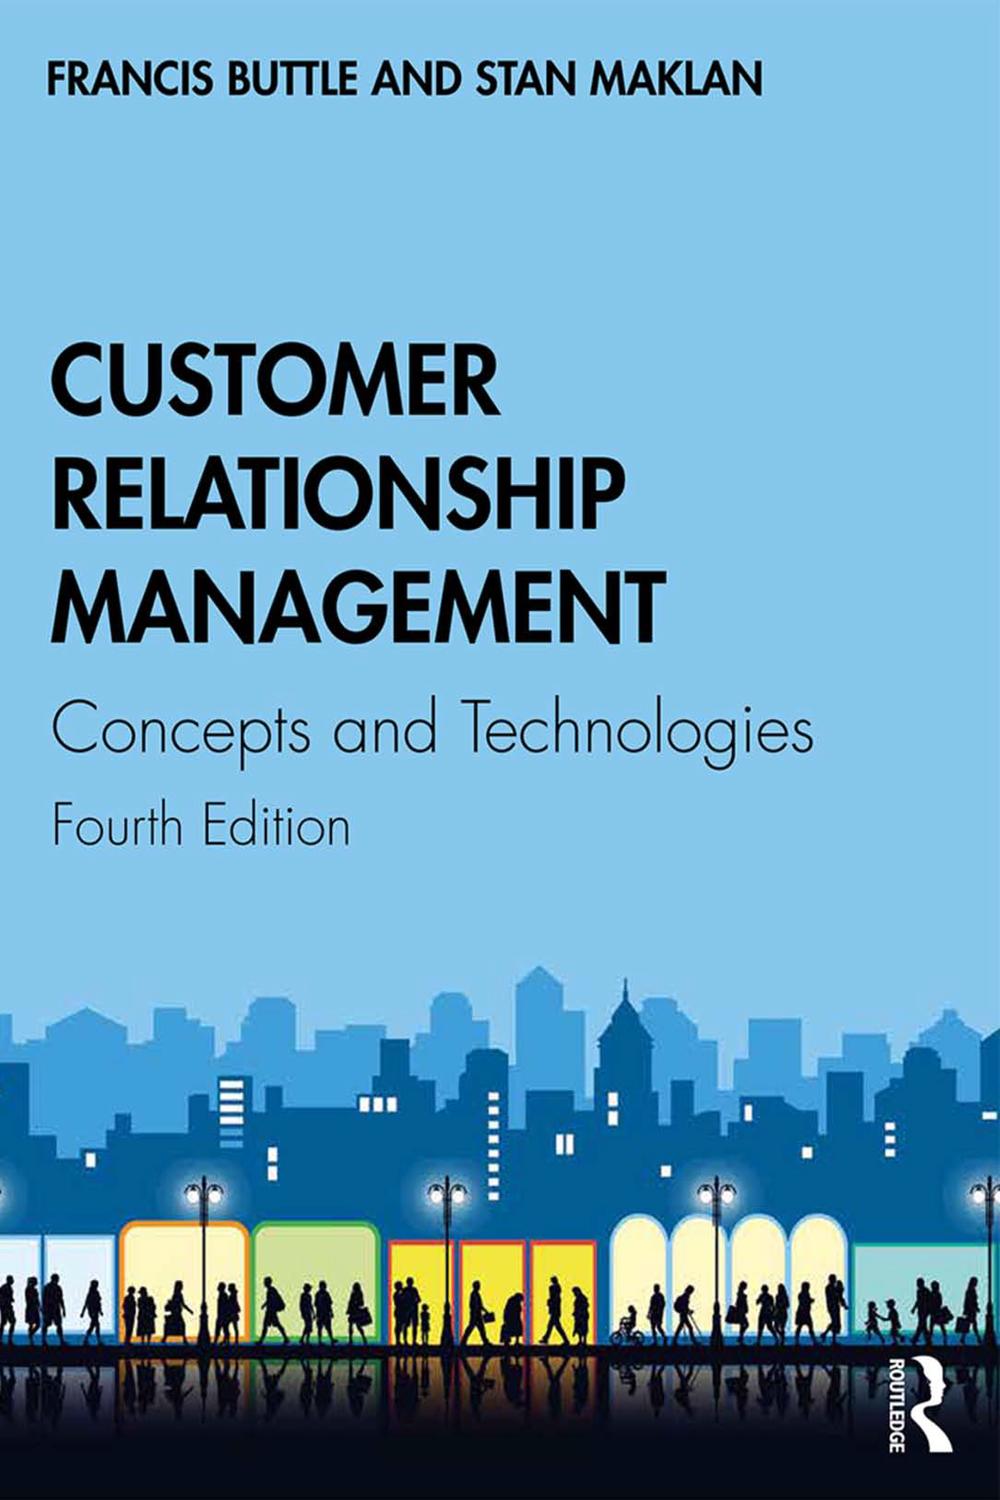 PDF] Customer Relationship Management by Francis Buttle eBook